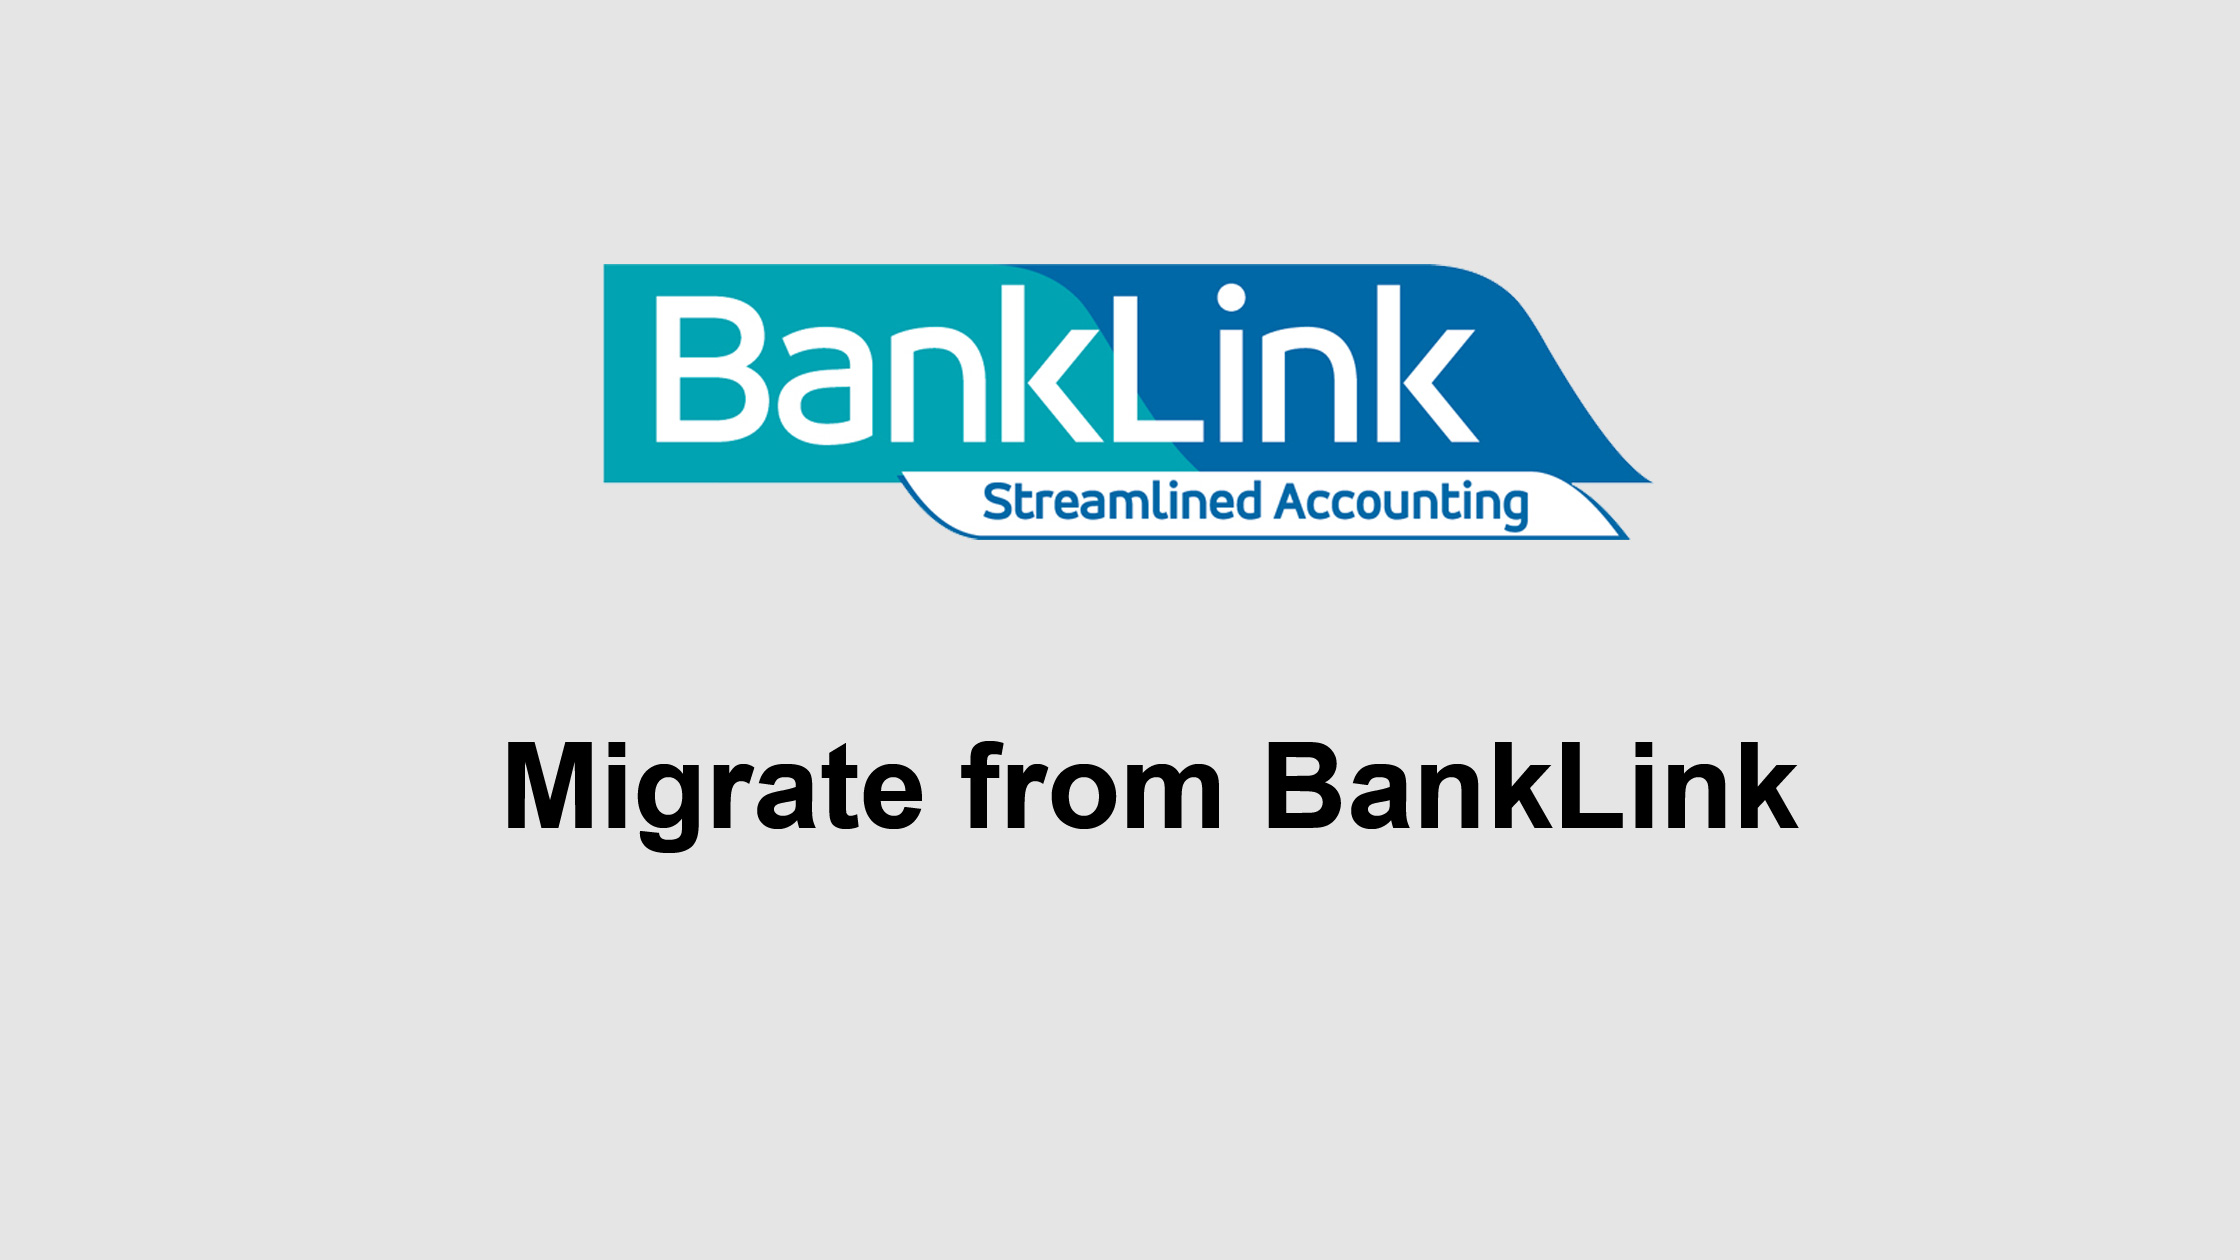 Migrate from BankLink